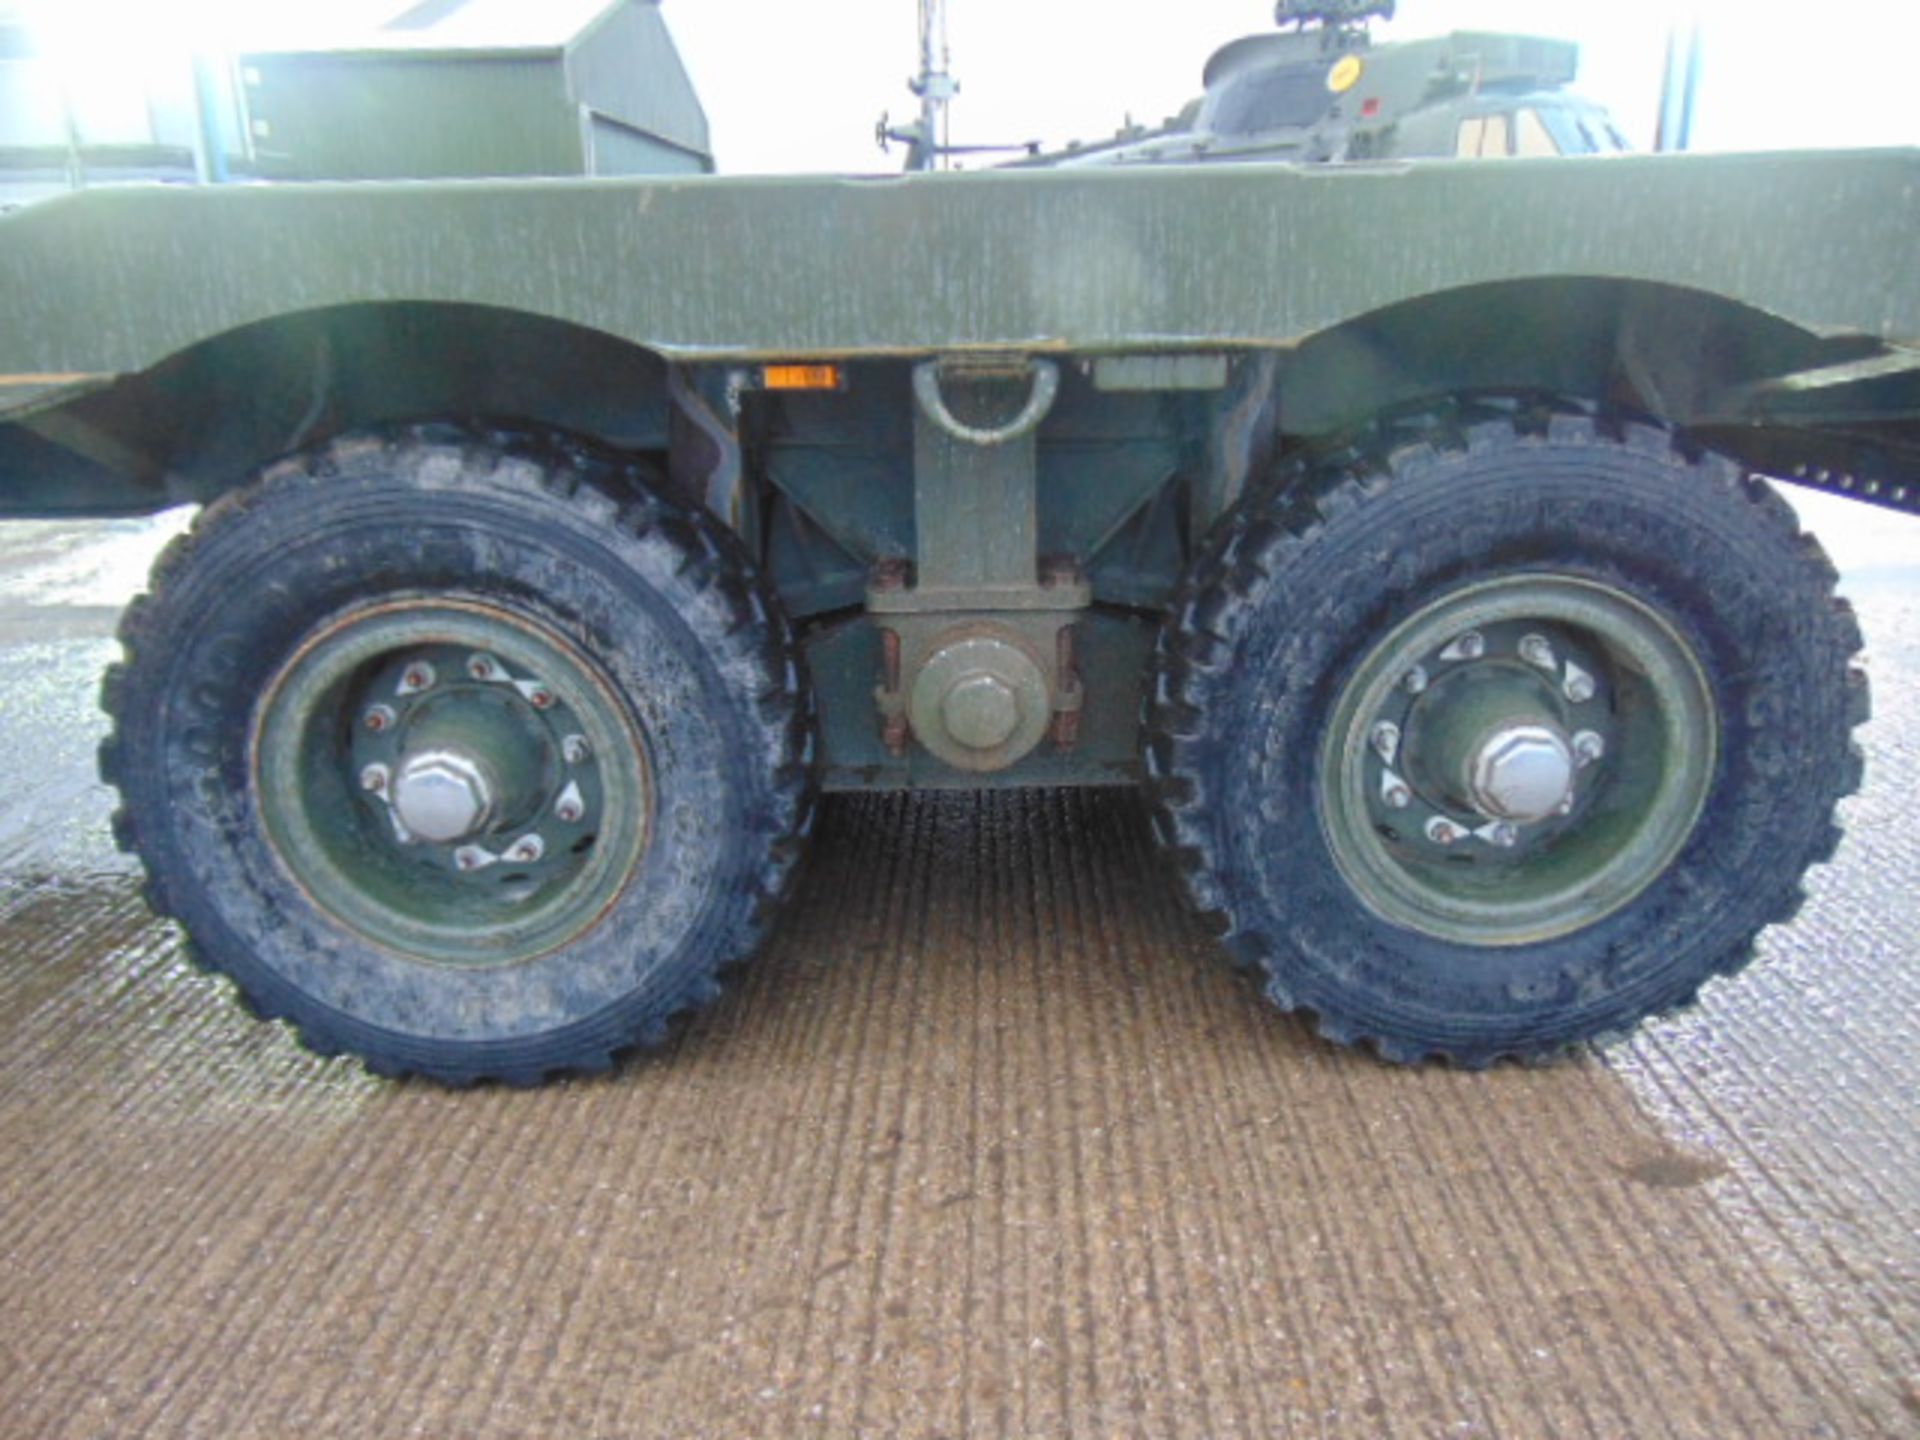 2009 Broshuis B.V. 2APAS-72 Twin Axle Improved Mobility Off Road Trailer - Image 9 of 21